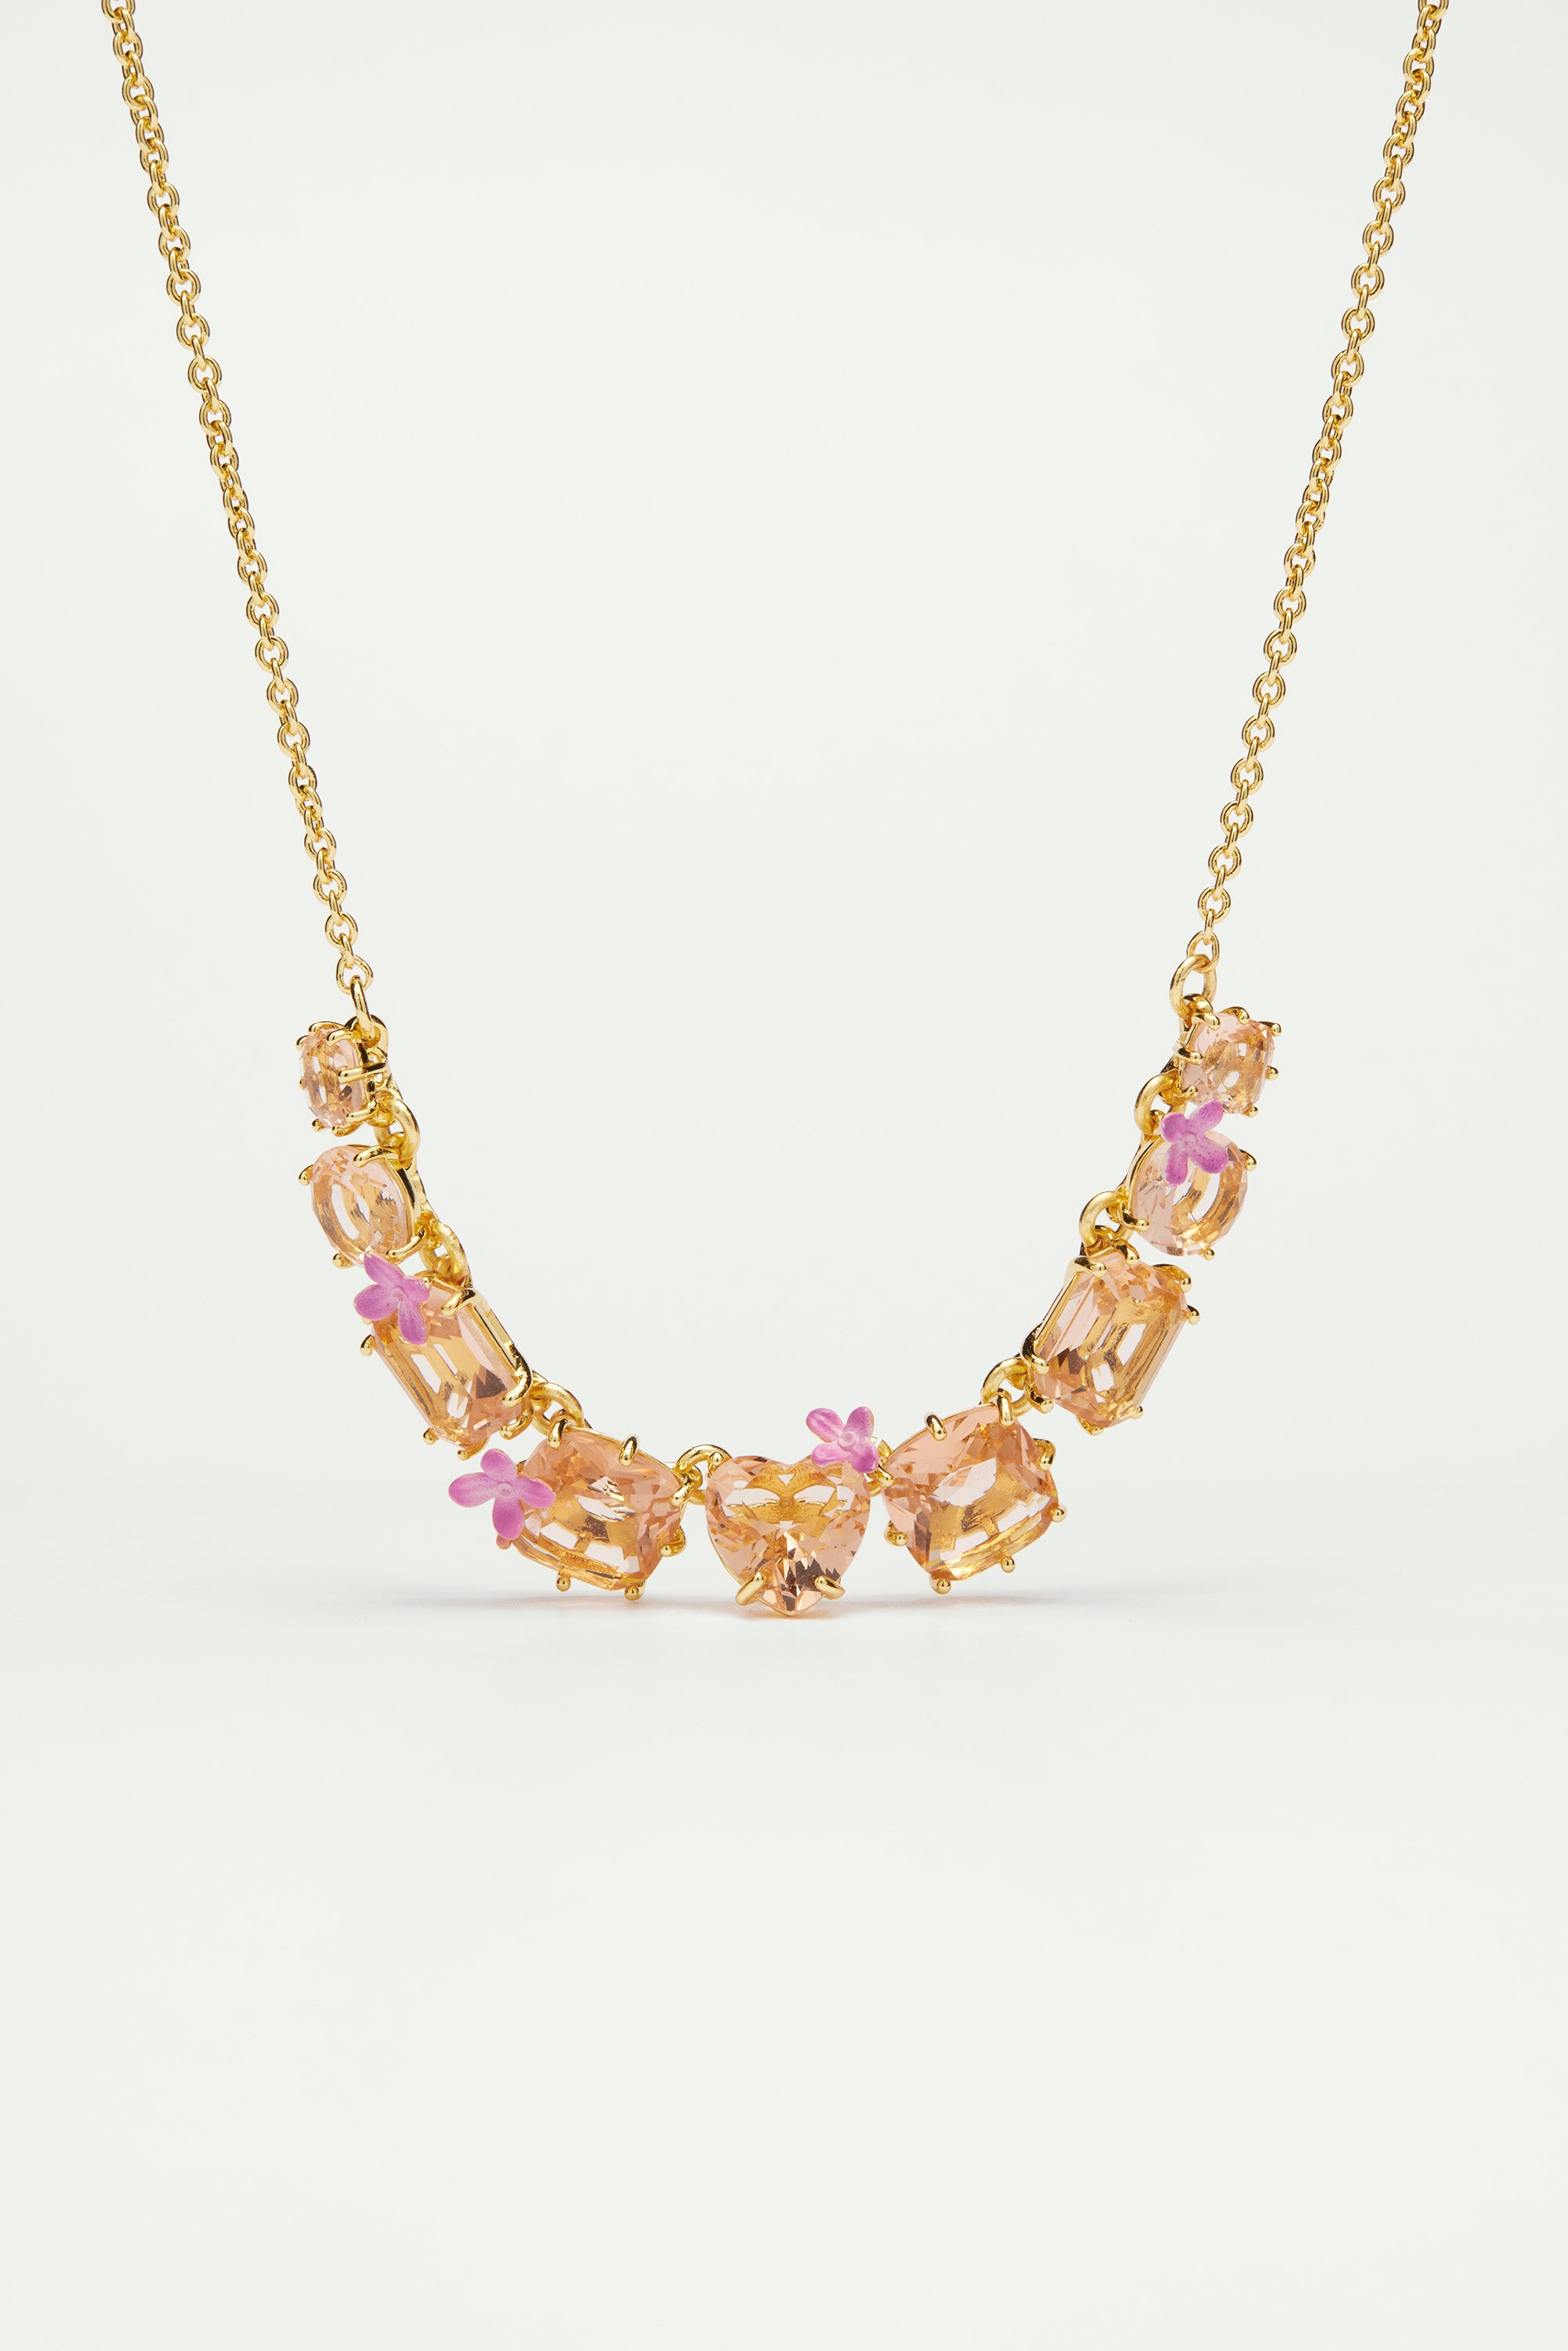 Apricot pink diamantine flower and 9 stone fine necklace